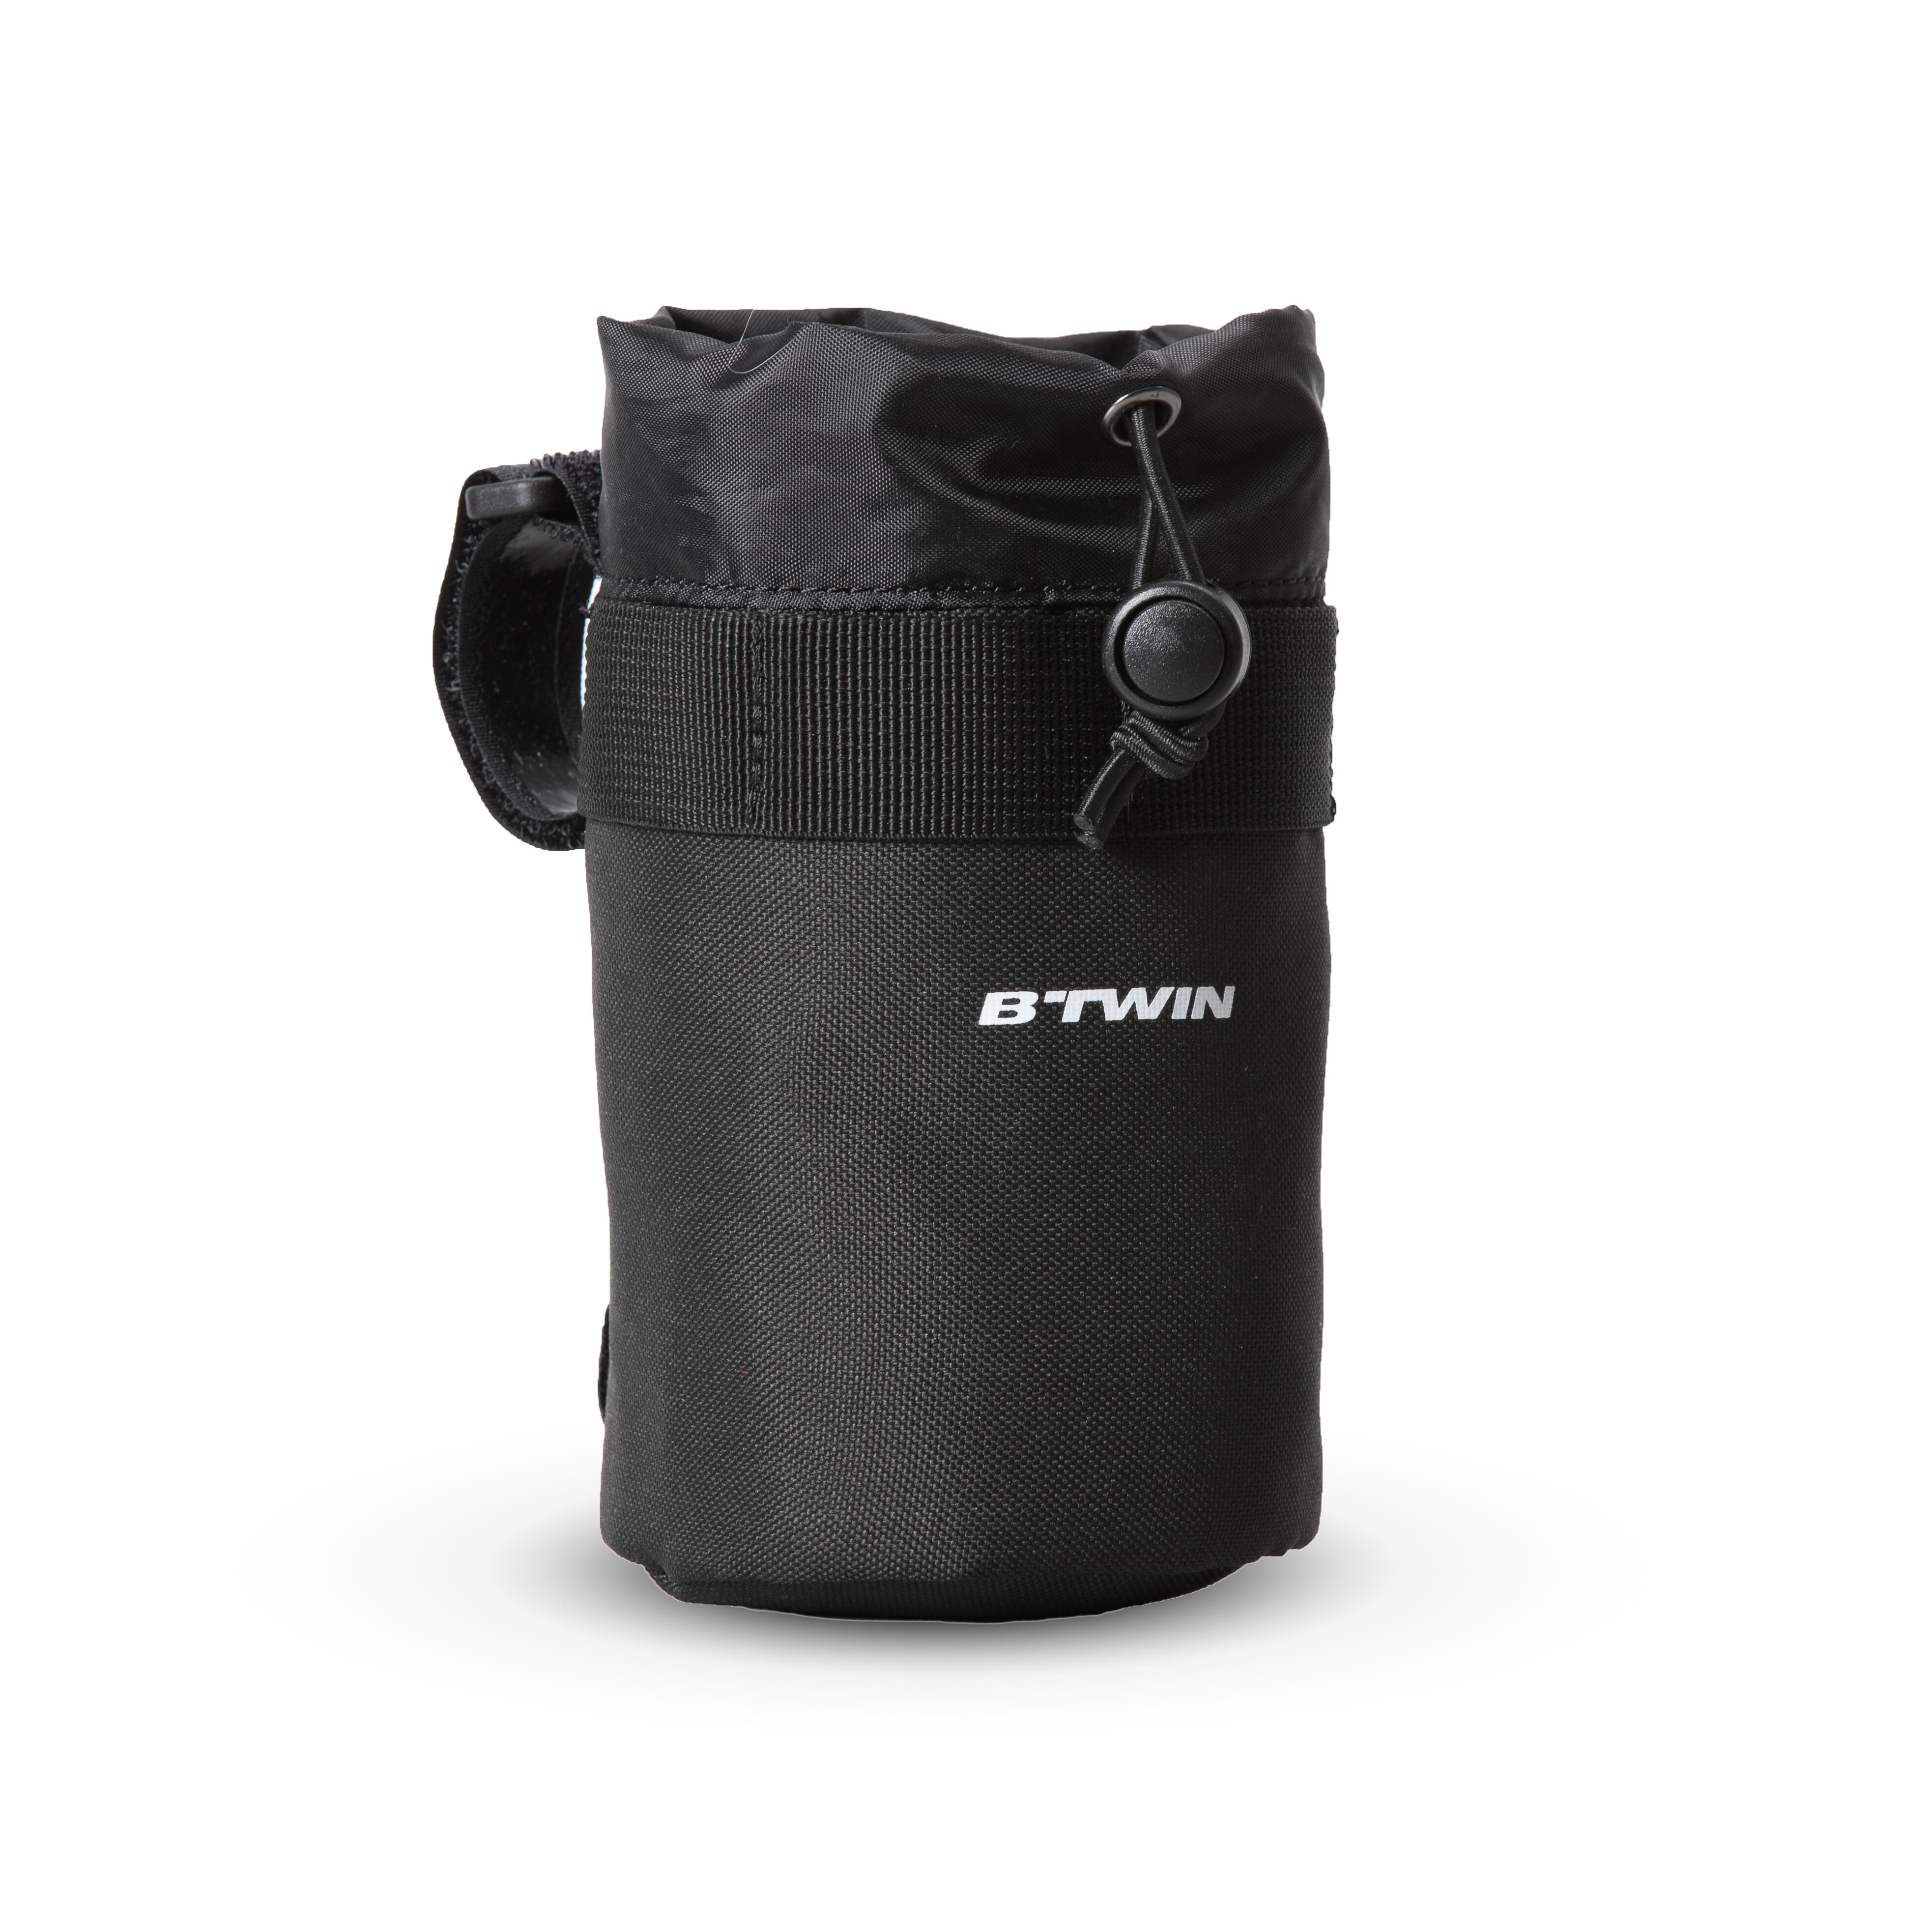 btwin cycle bottle holder